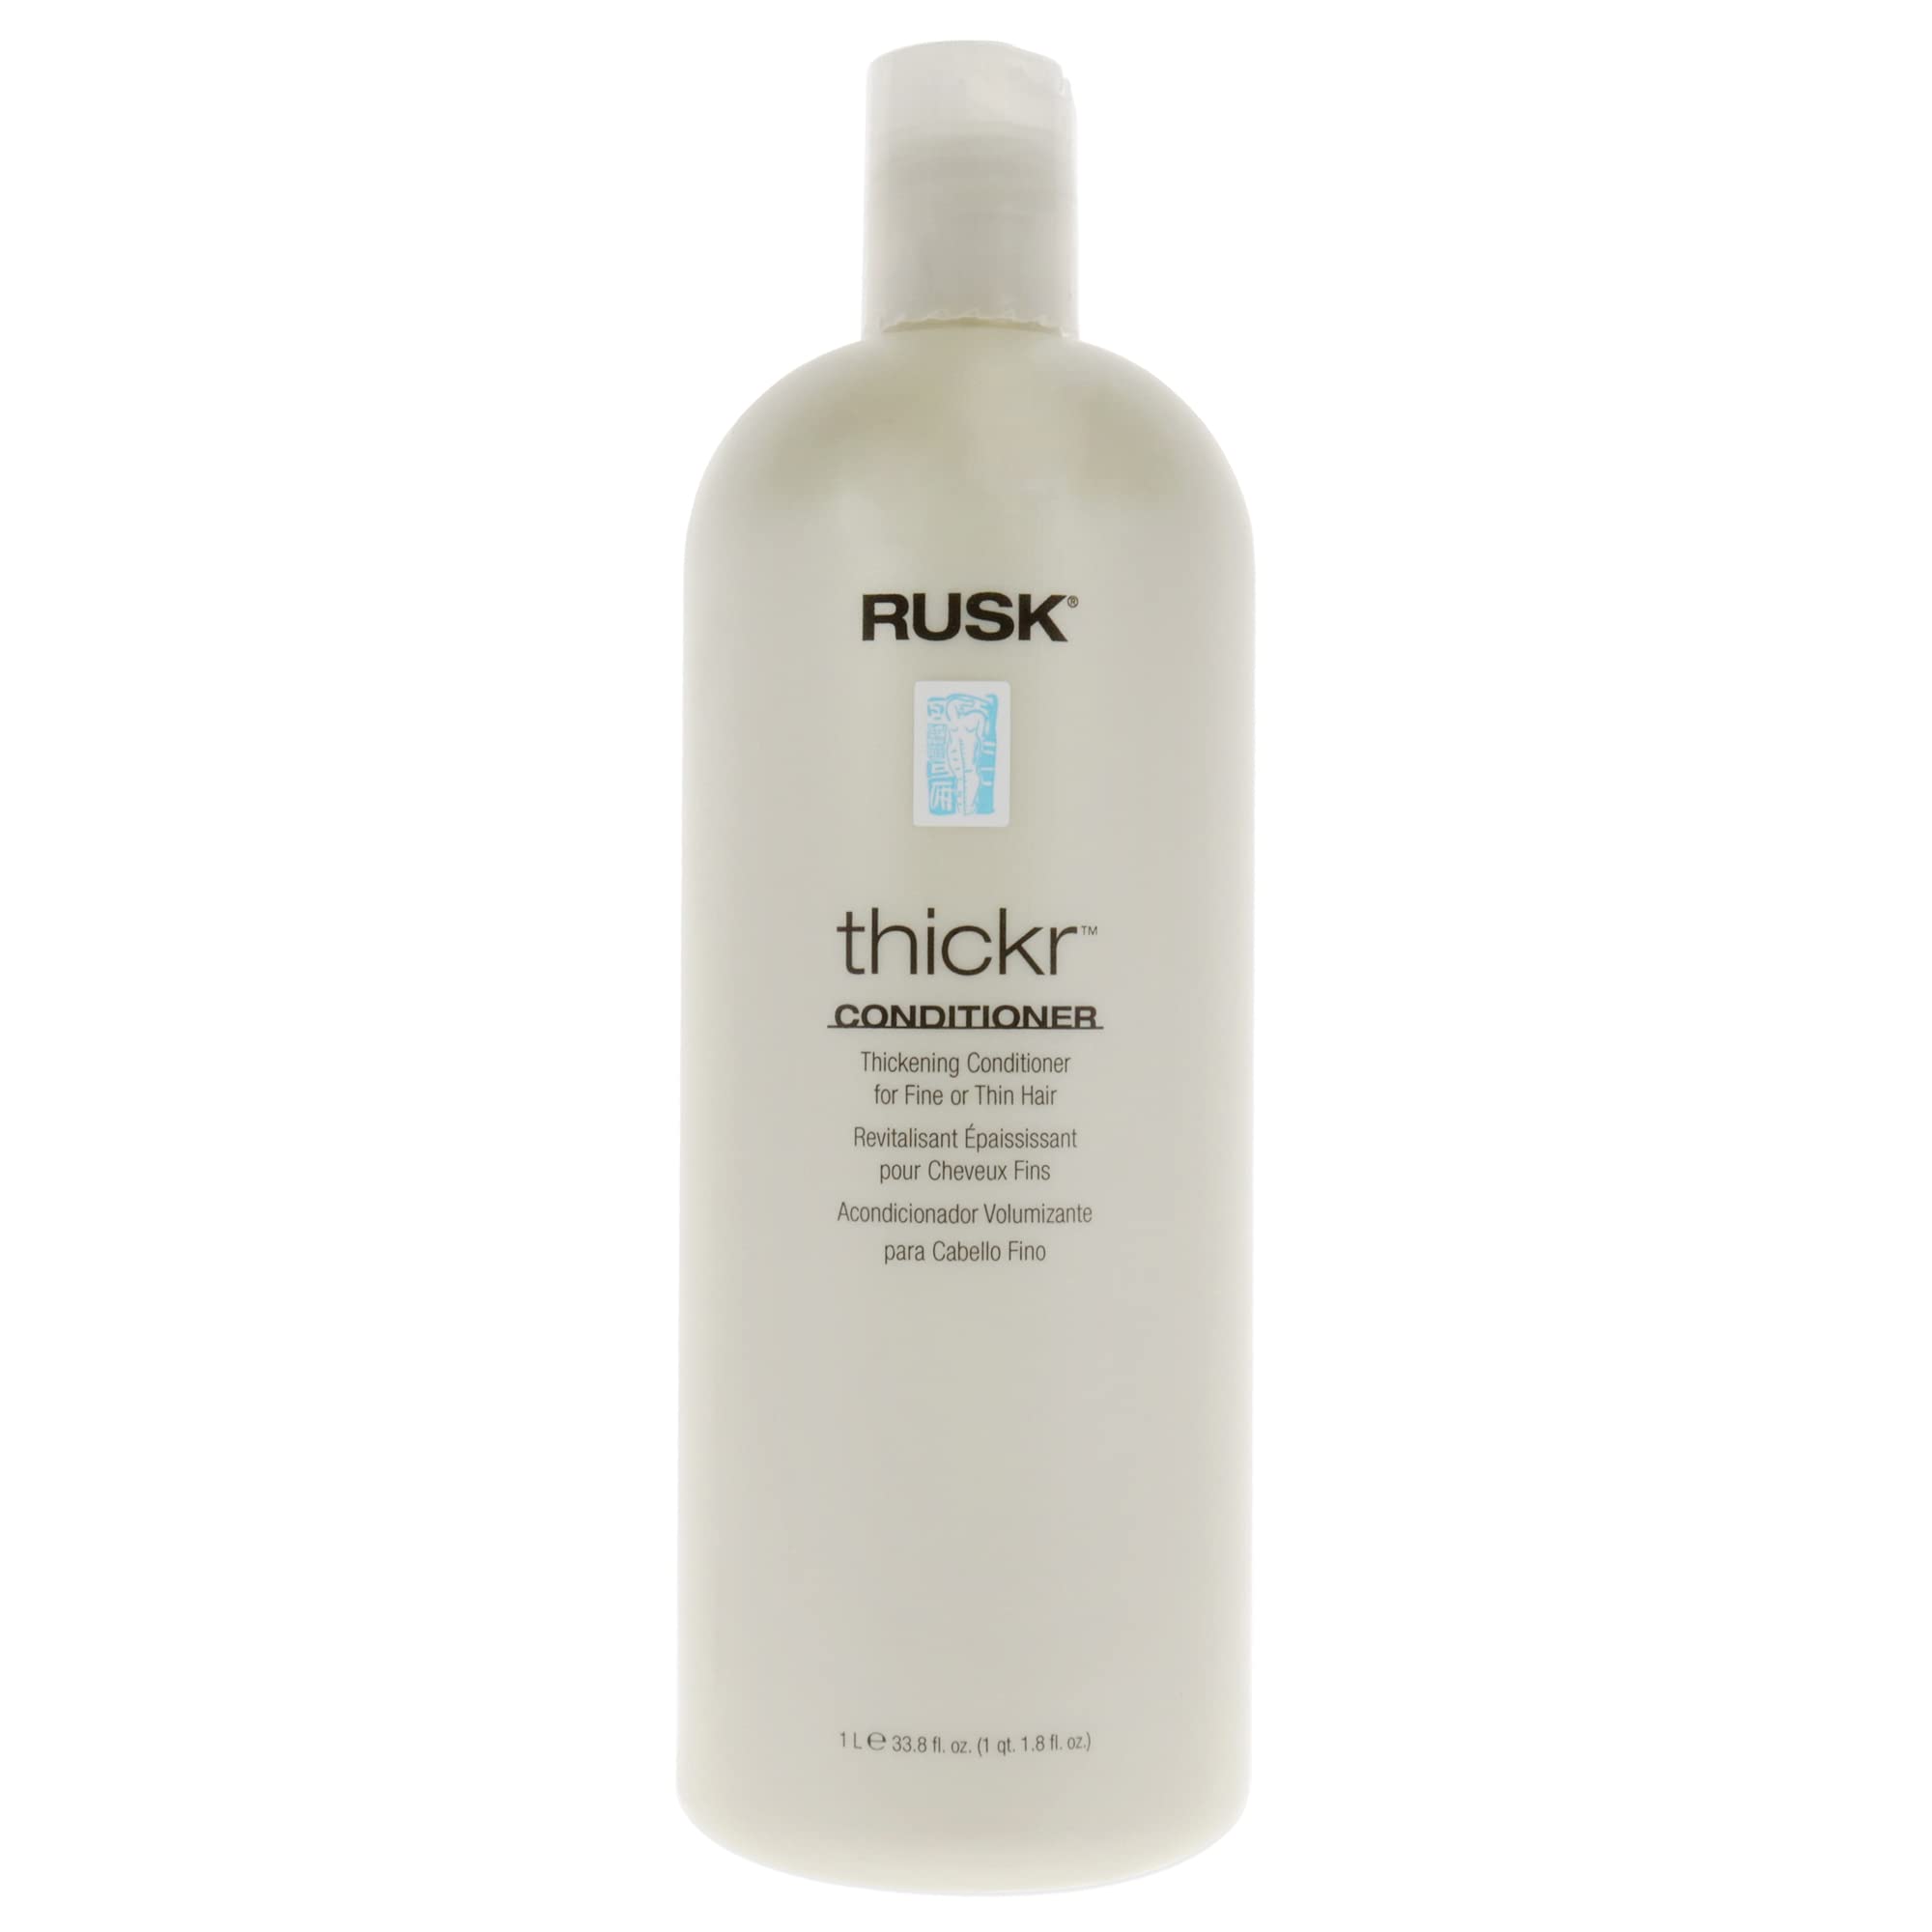 RUSK Designer Collection Thicker Thickening Conditioner for Fine or Thin Hair, 33.8 Oz, Daily-Use Thickening Conditioner that Strengthens and Repairs, Gives Full-Bodied Appearance